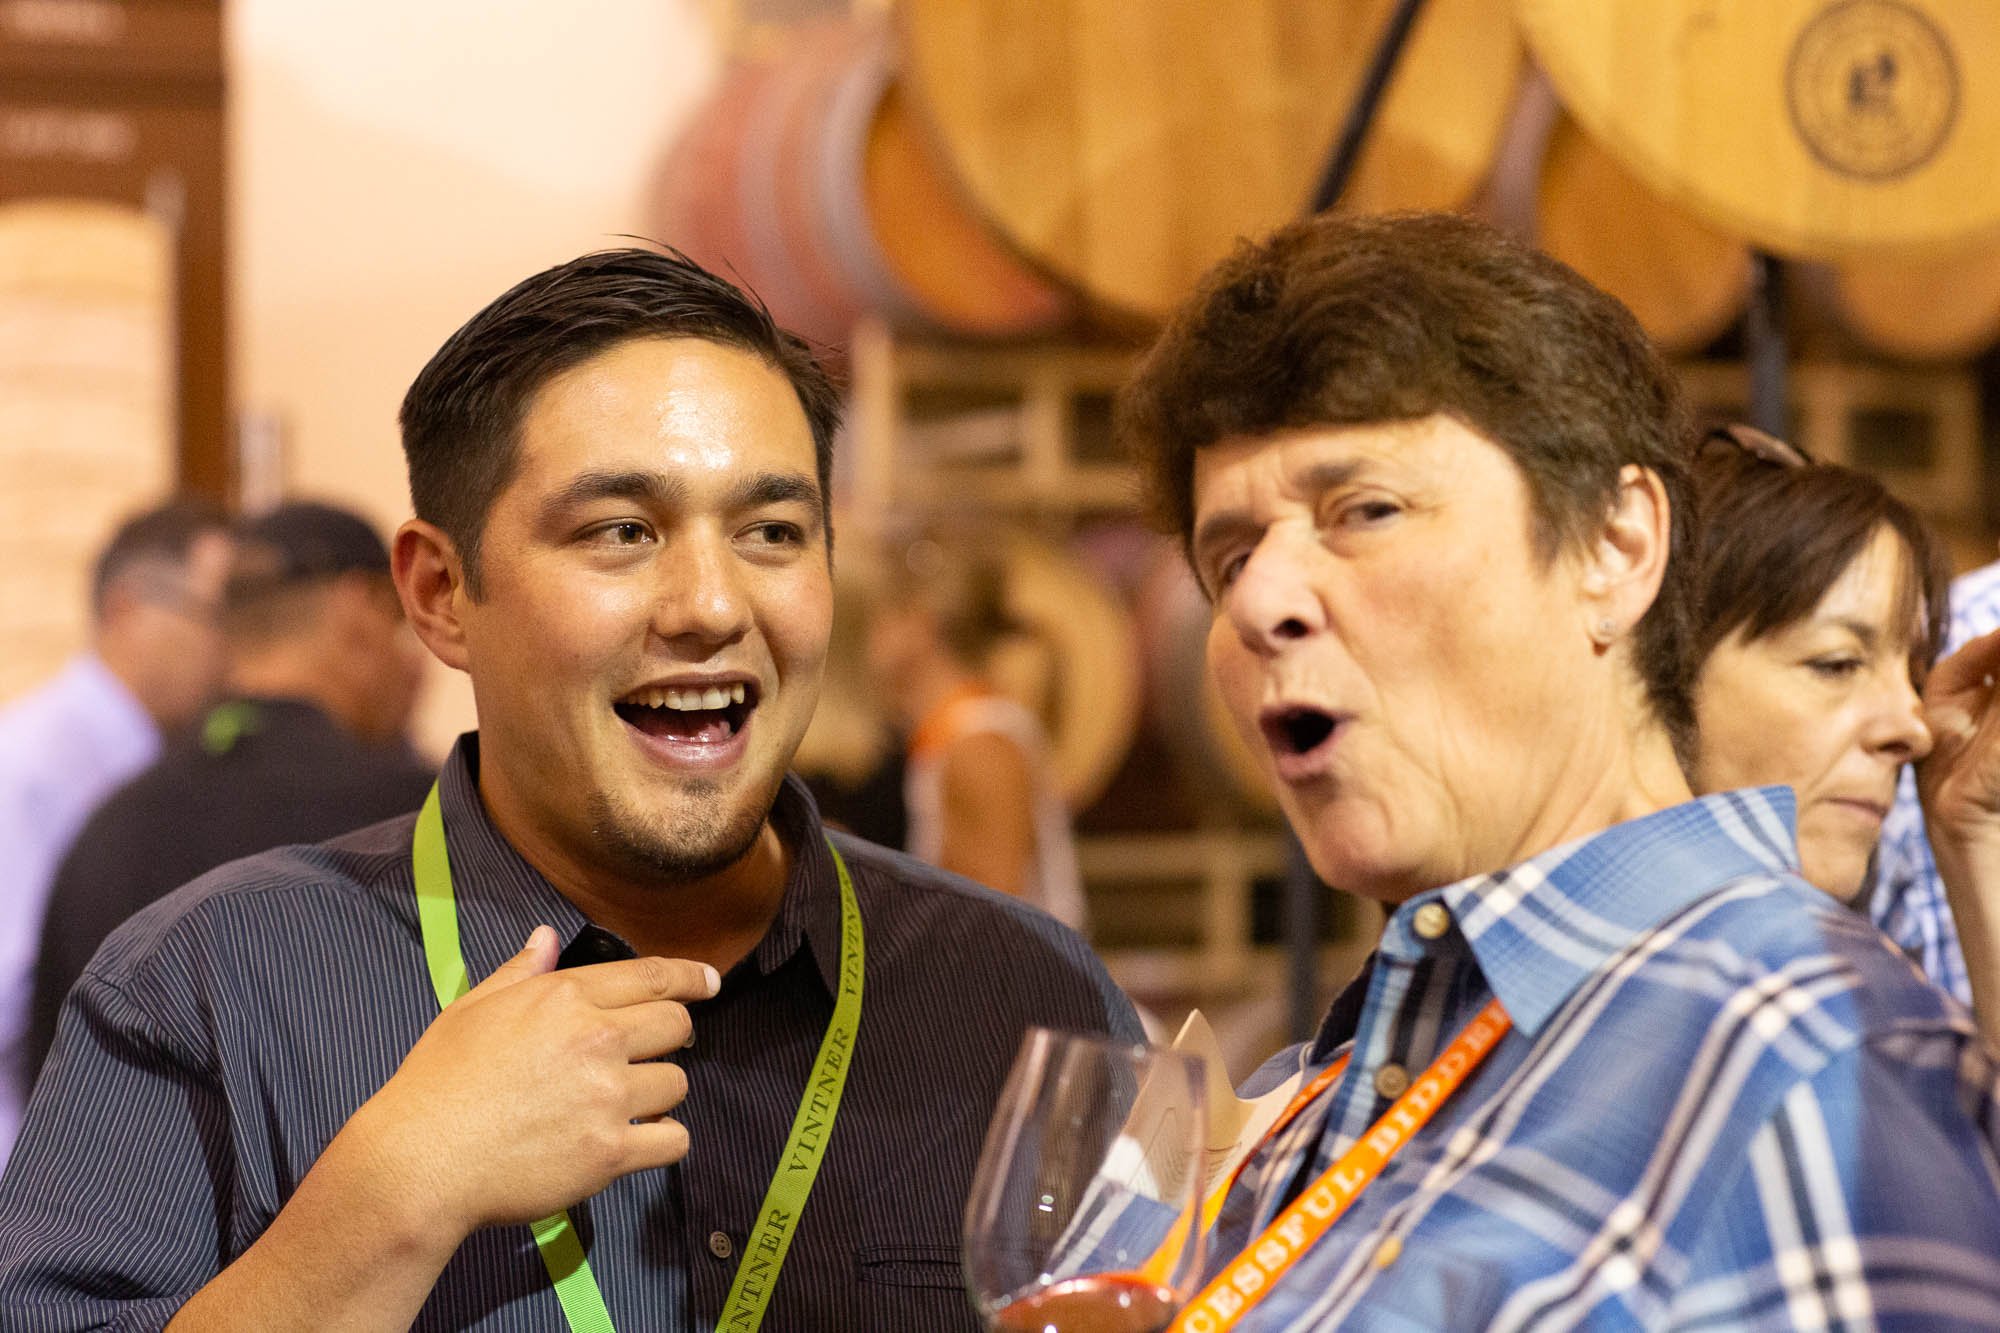 Kale Anderson, winemaker, and Diana